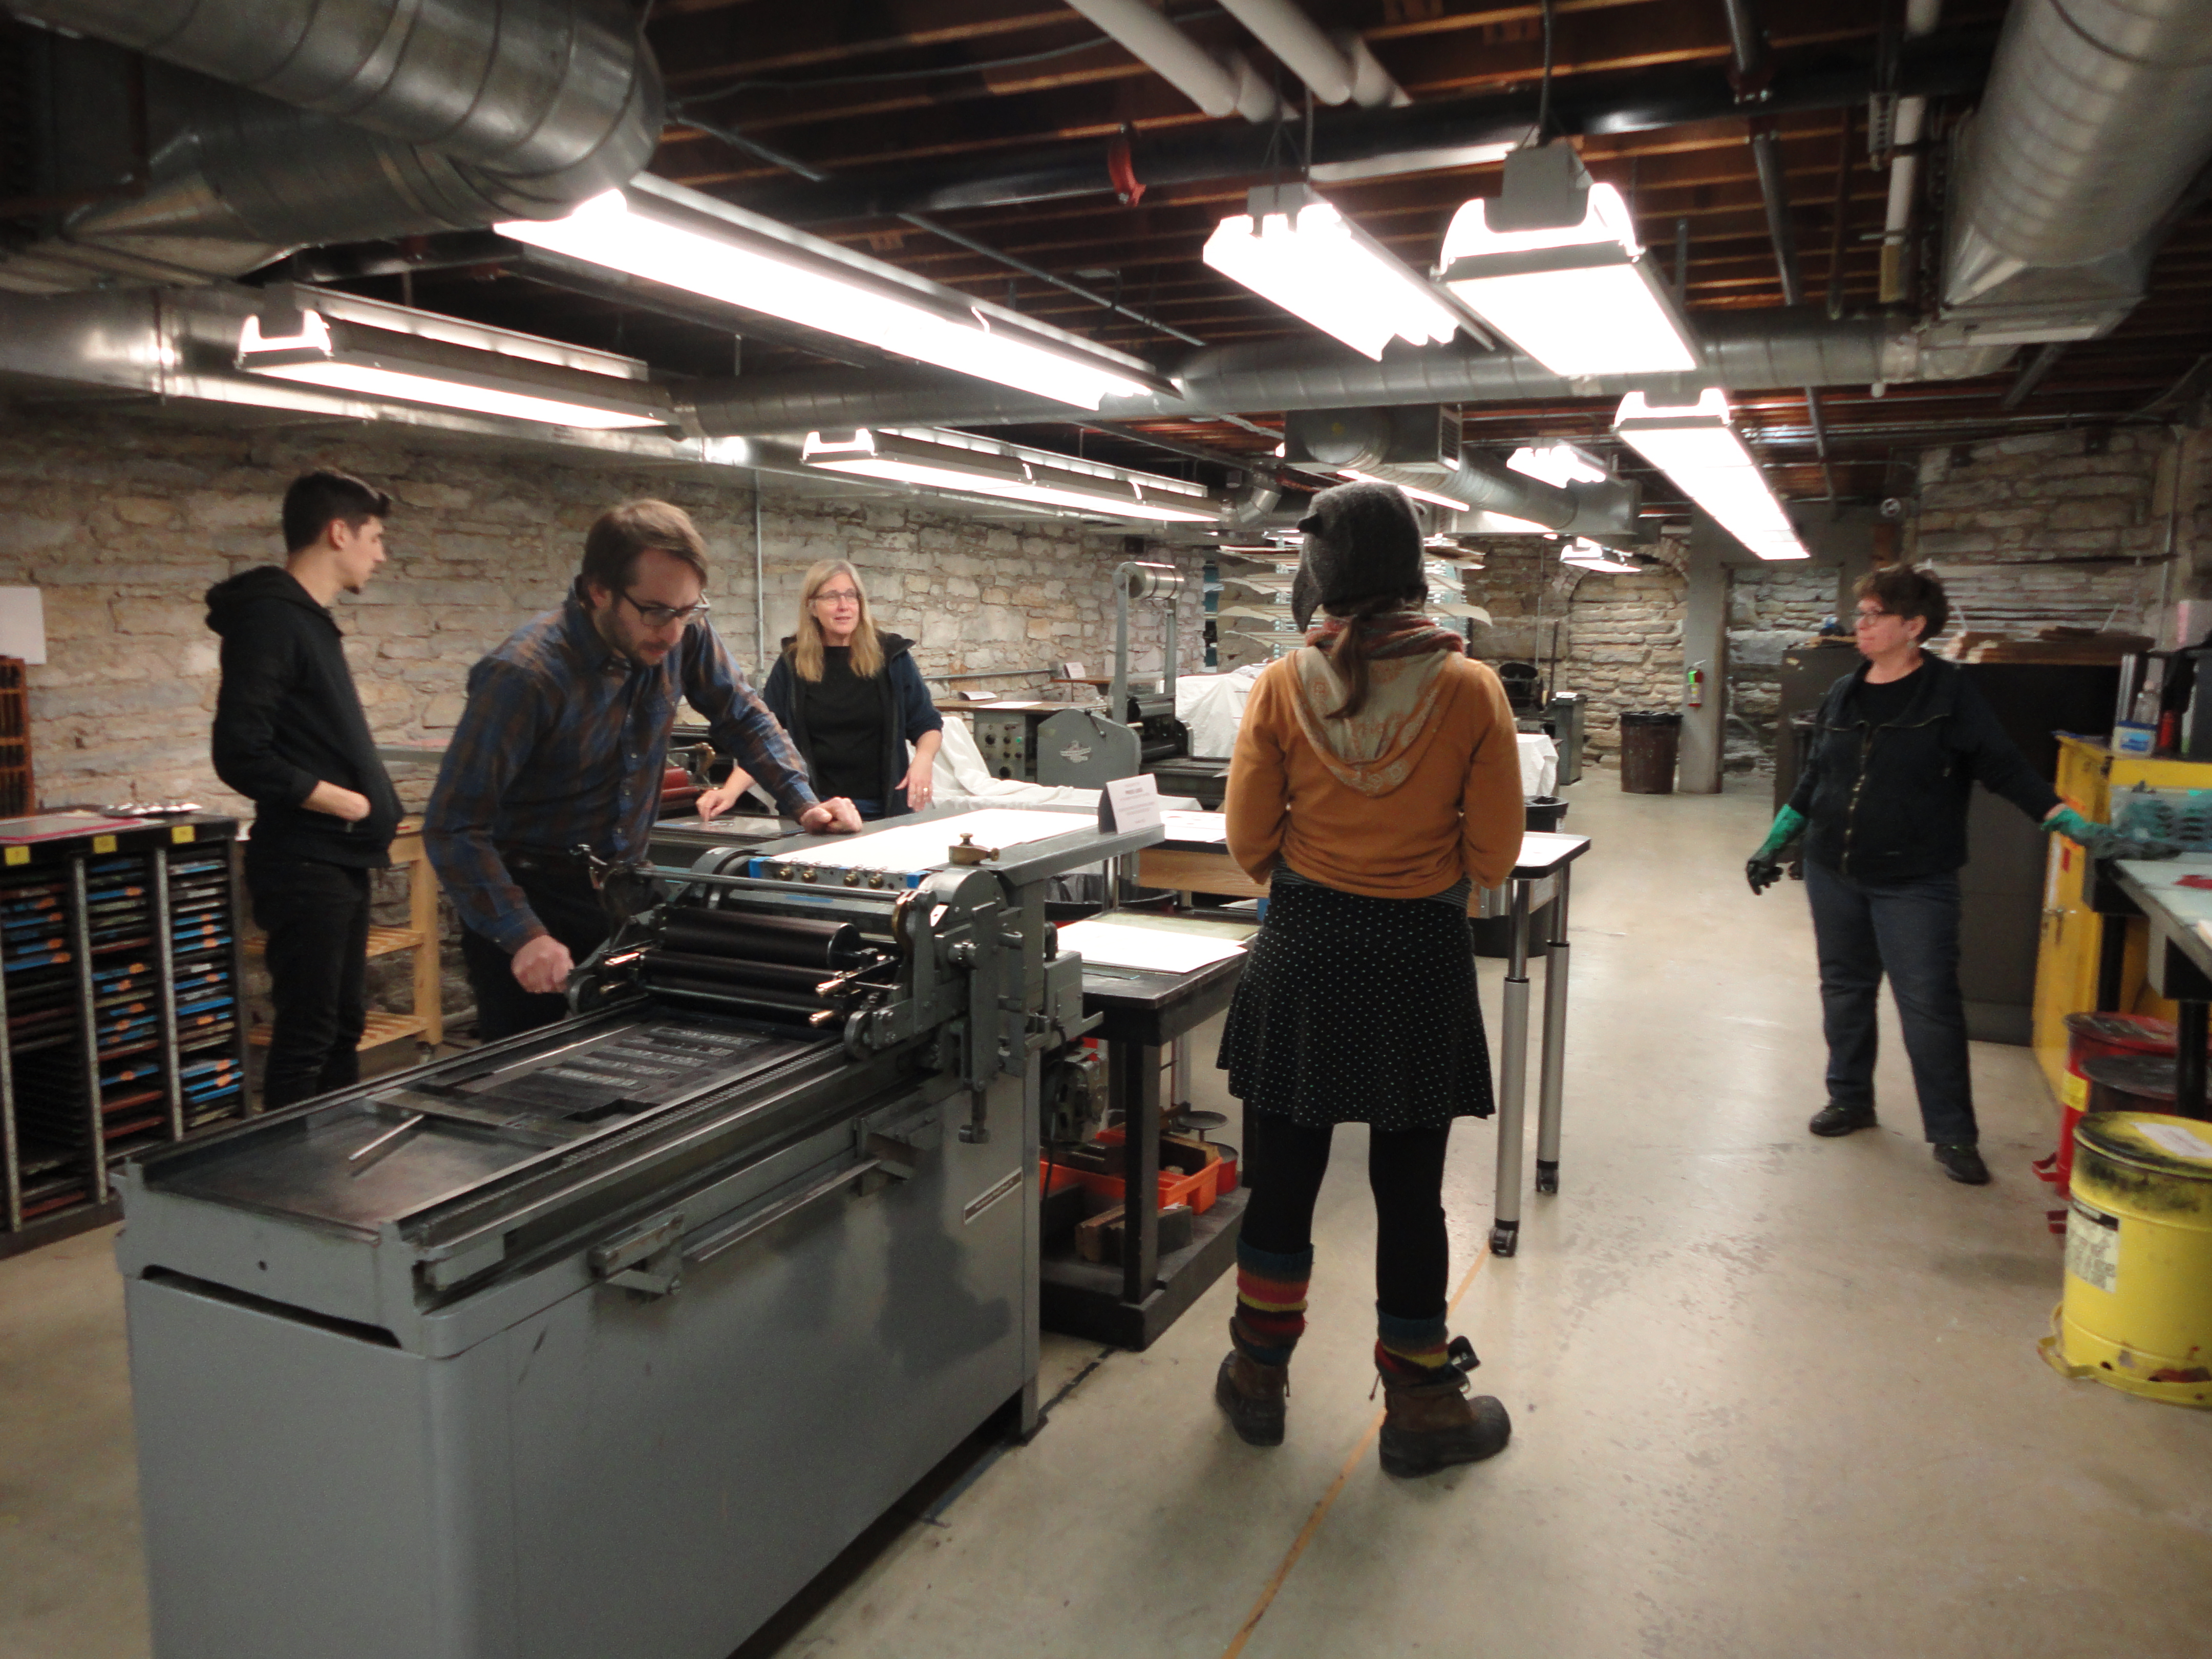 The Jerome Foundation mentees and CB working in the printing studio at MCBA.